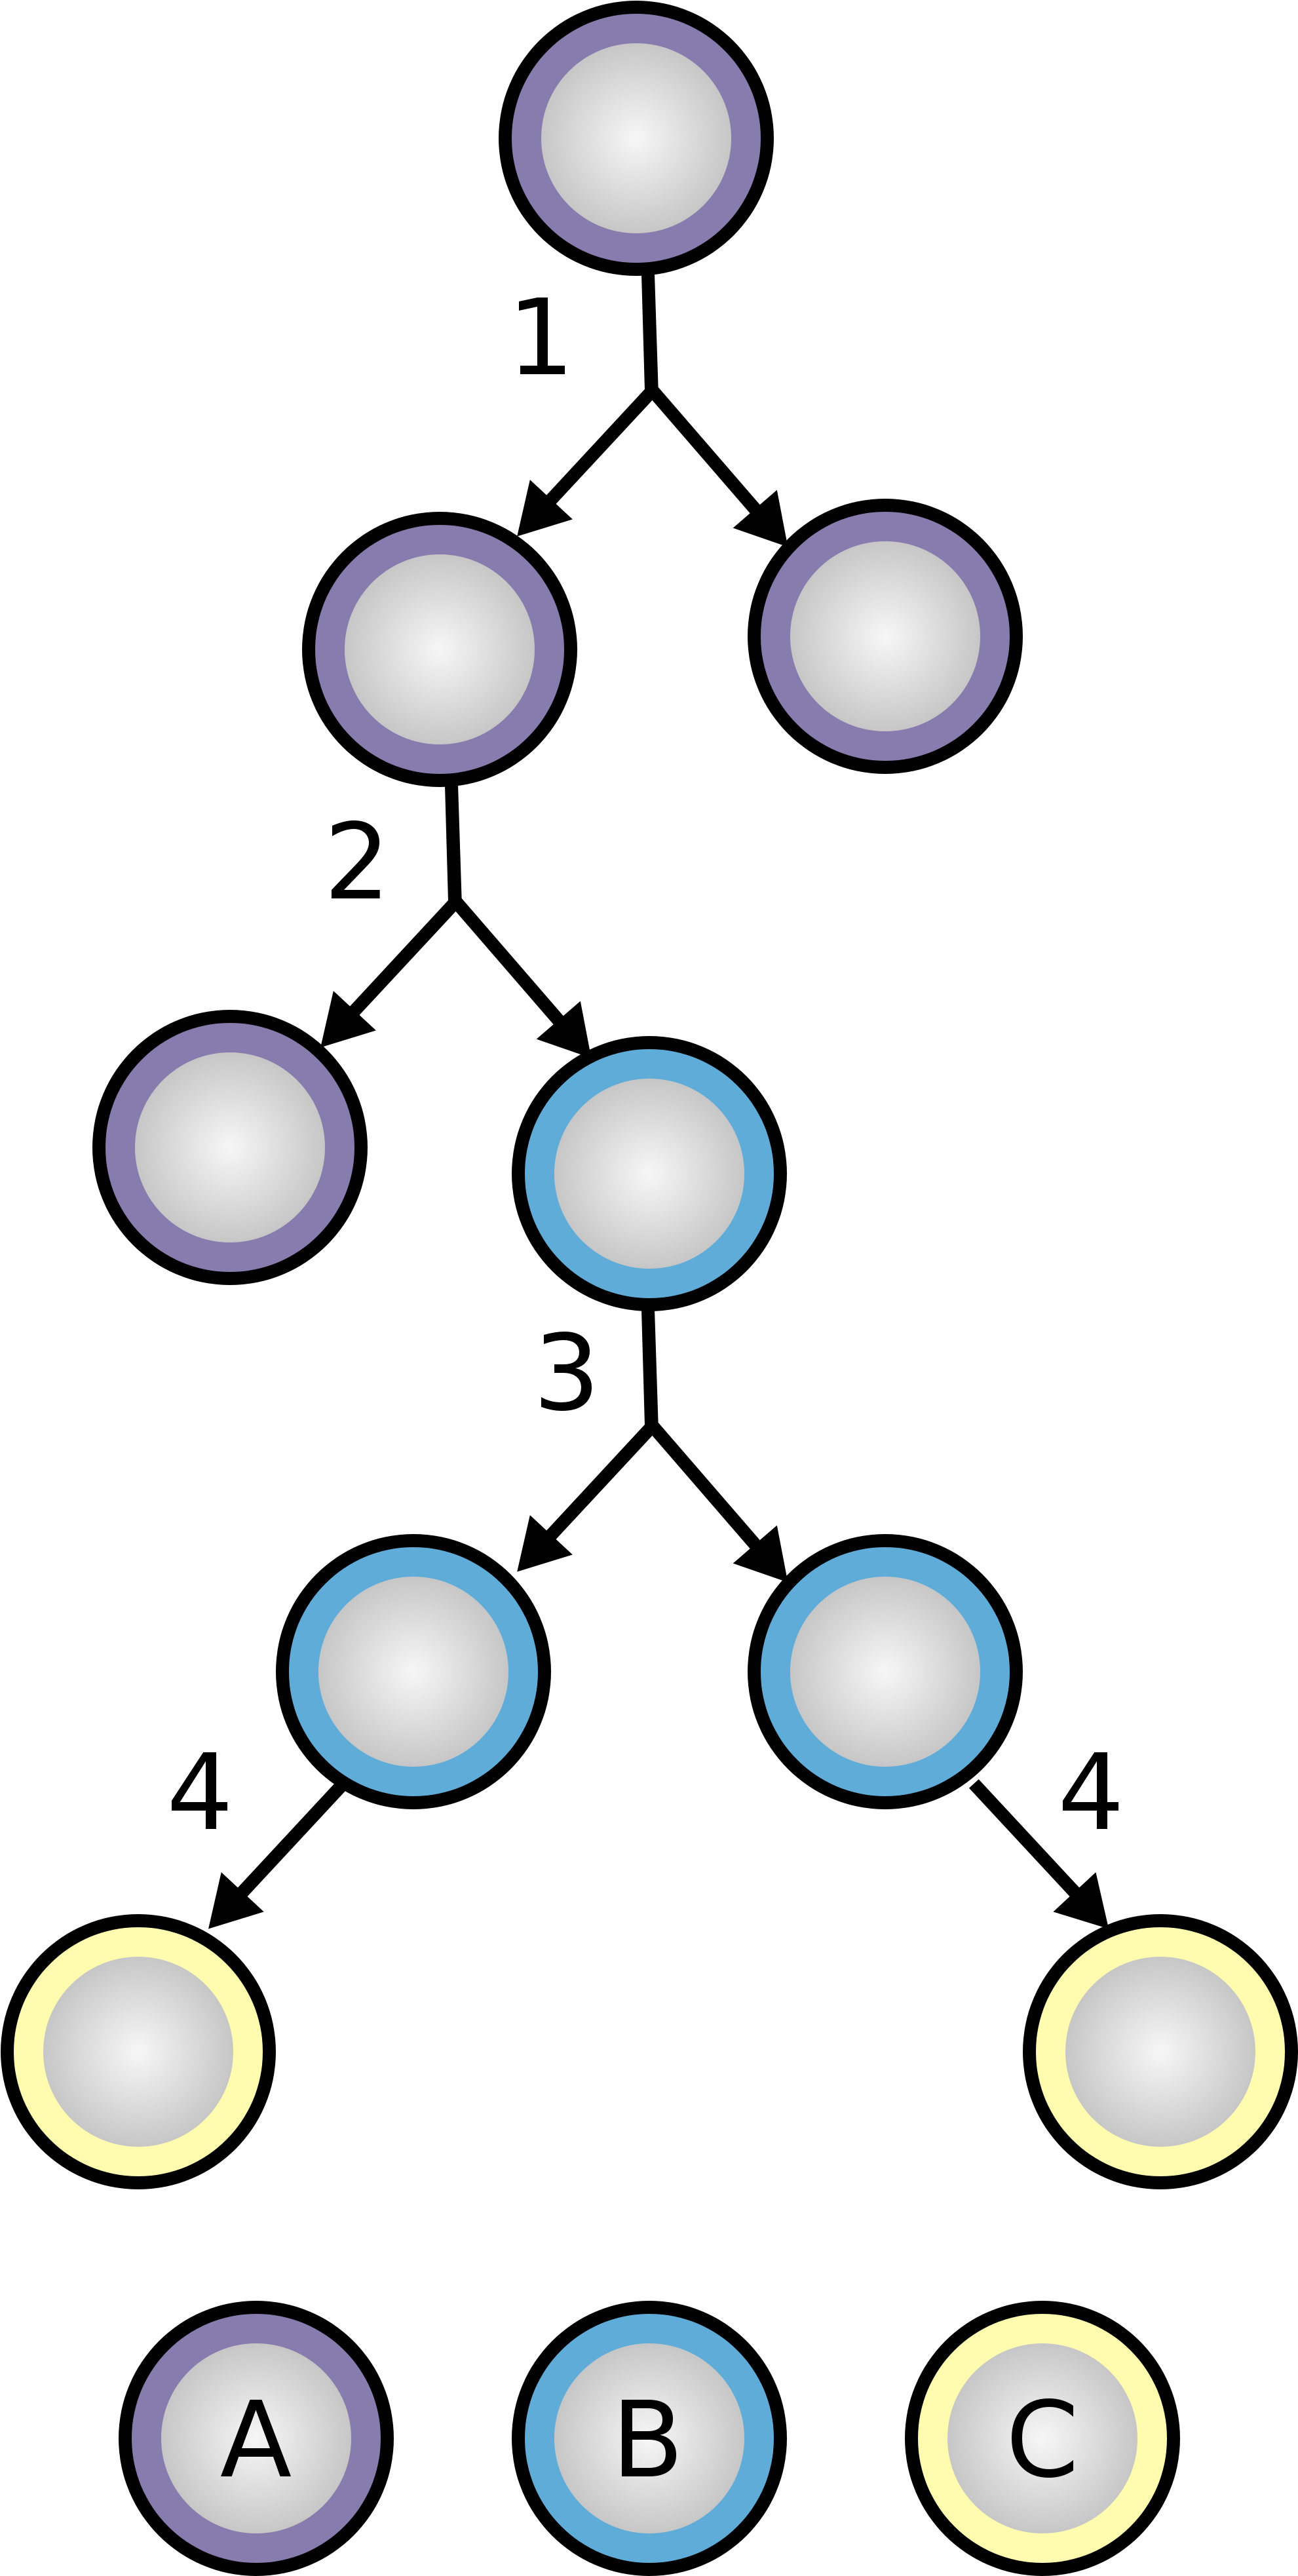 Stem Cell Division And Differentiation A - Stem Cell Division And Differentiation (2000x4000)